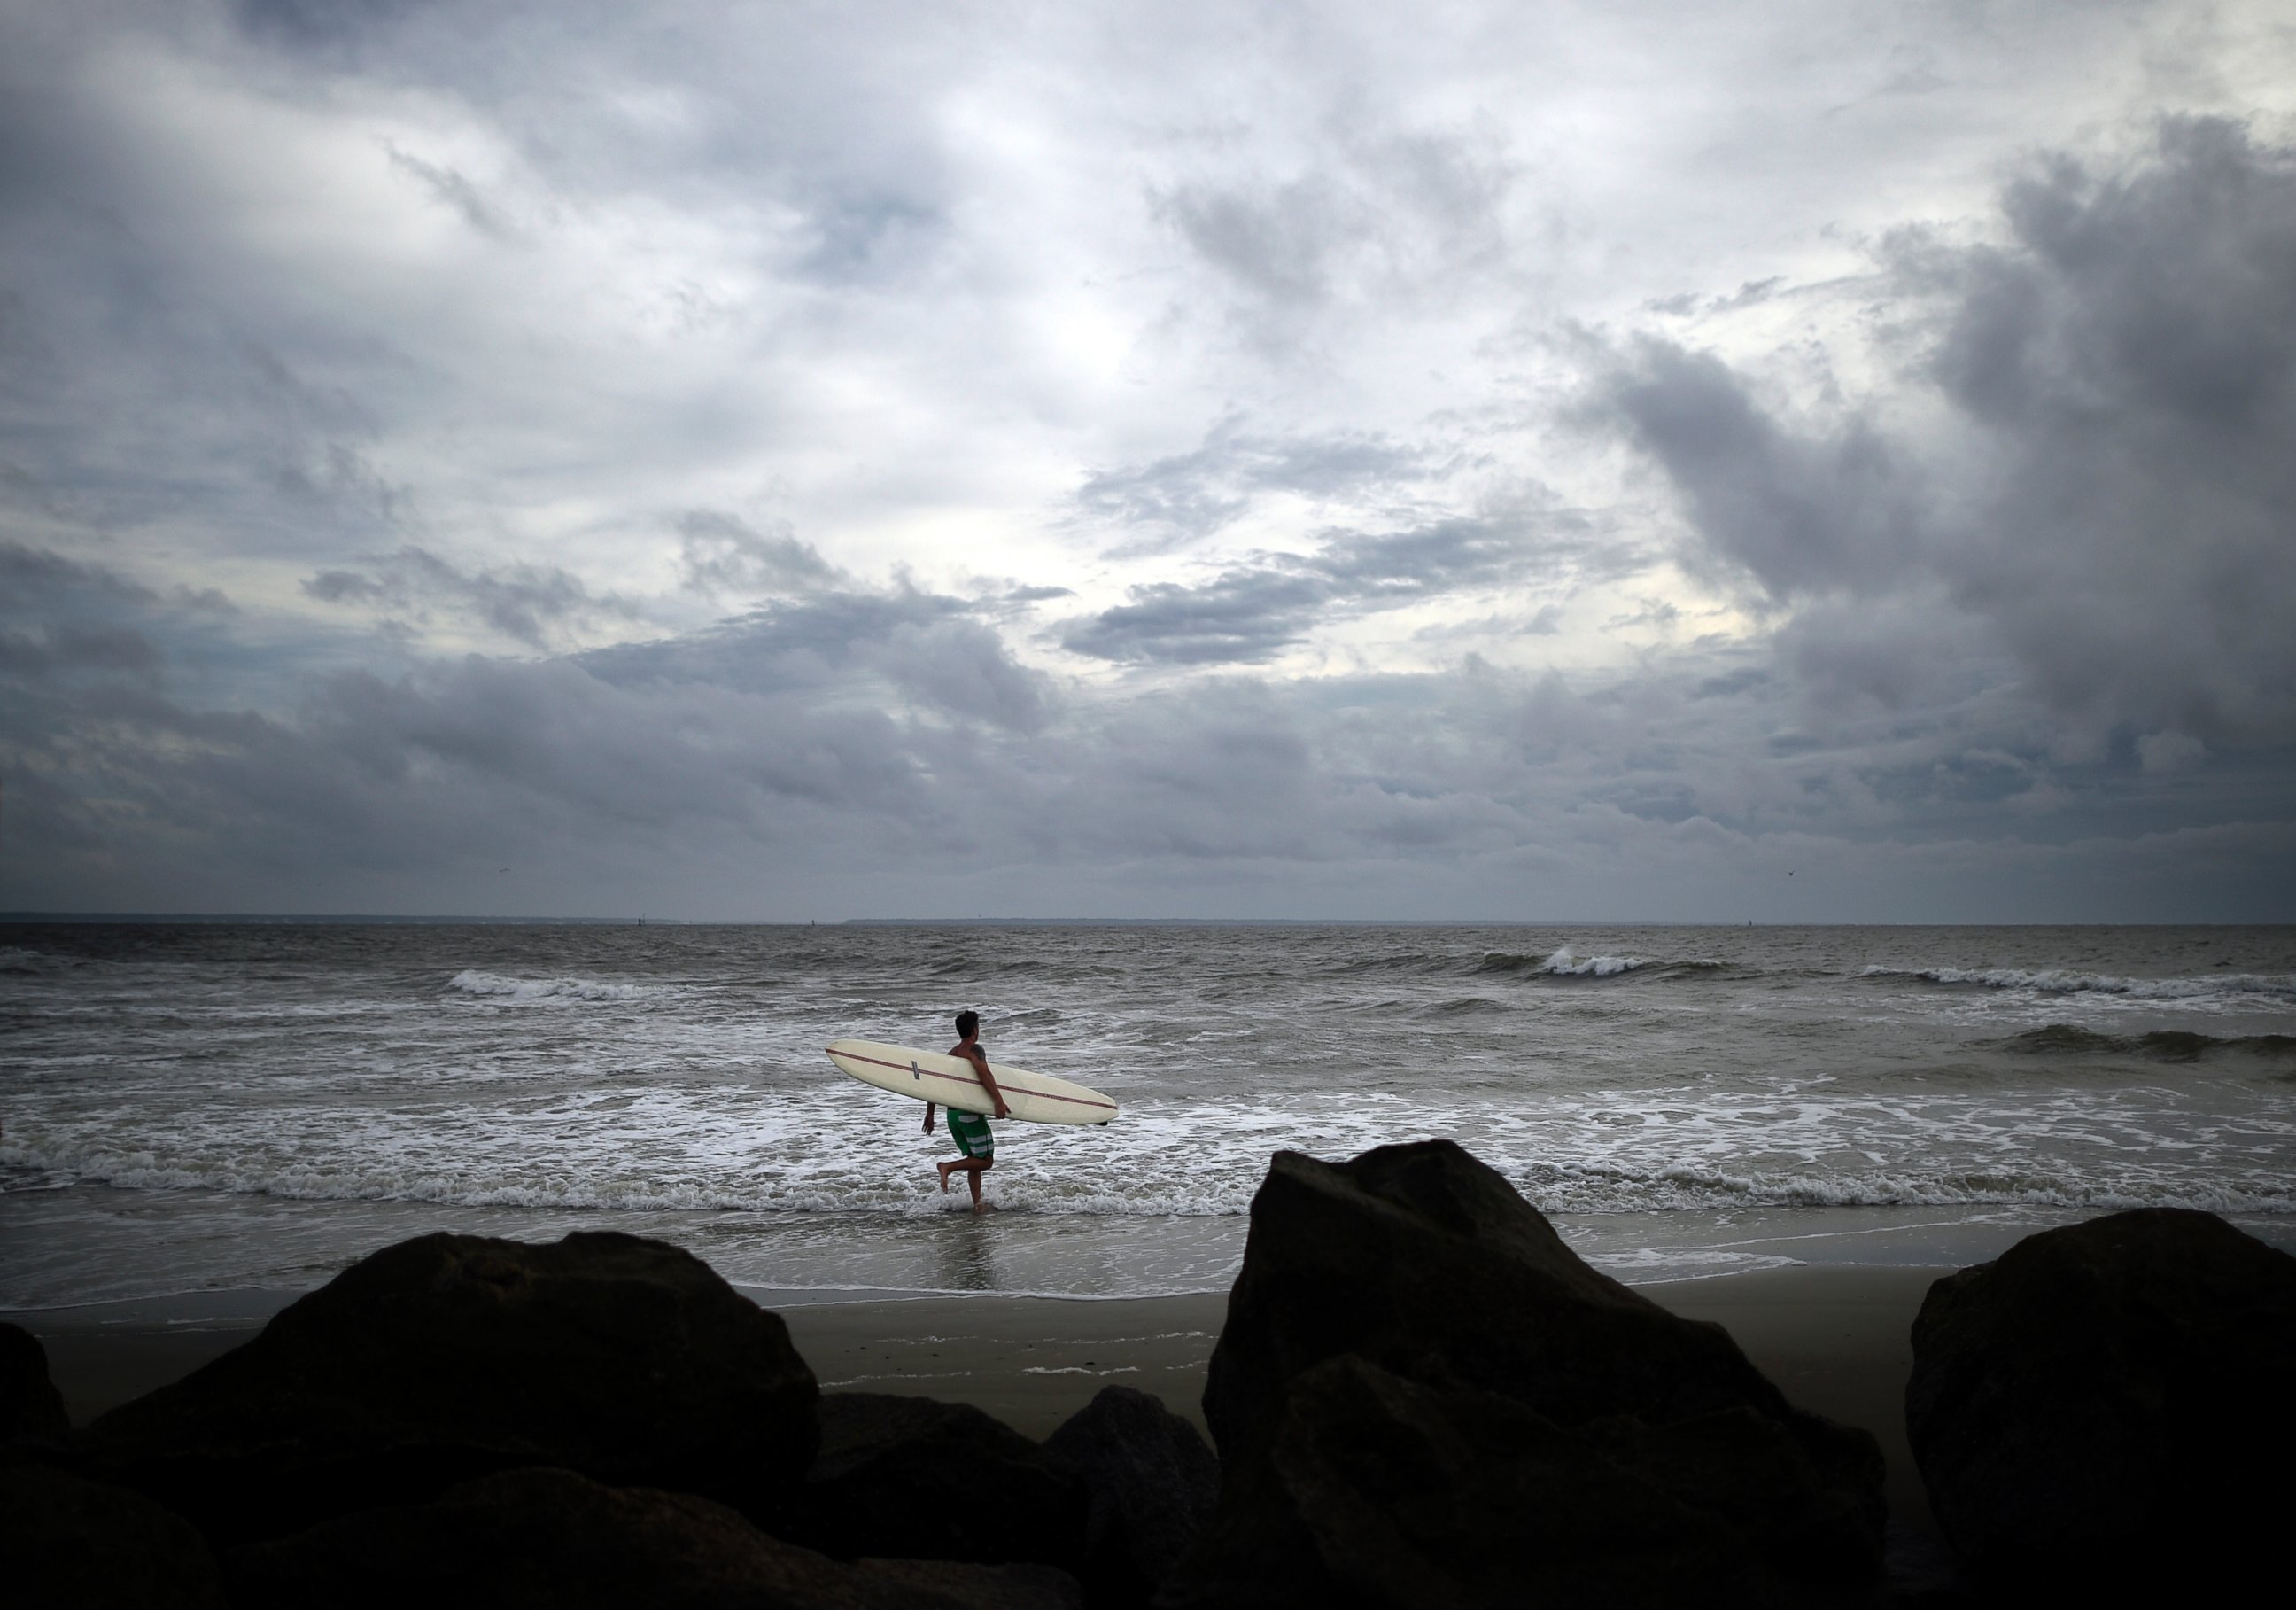 PHOTO: Kevin Taylor of Savannah, Ga., heads out to surf the waves on the north beach of Tybee Island as Hurricane Arthur makes its way up the East Coast, July 3, 2014.